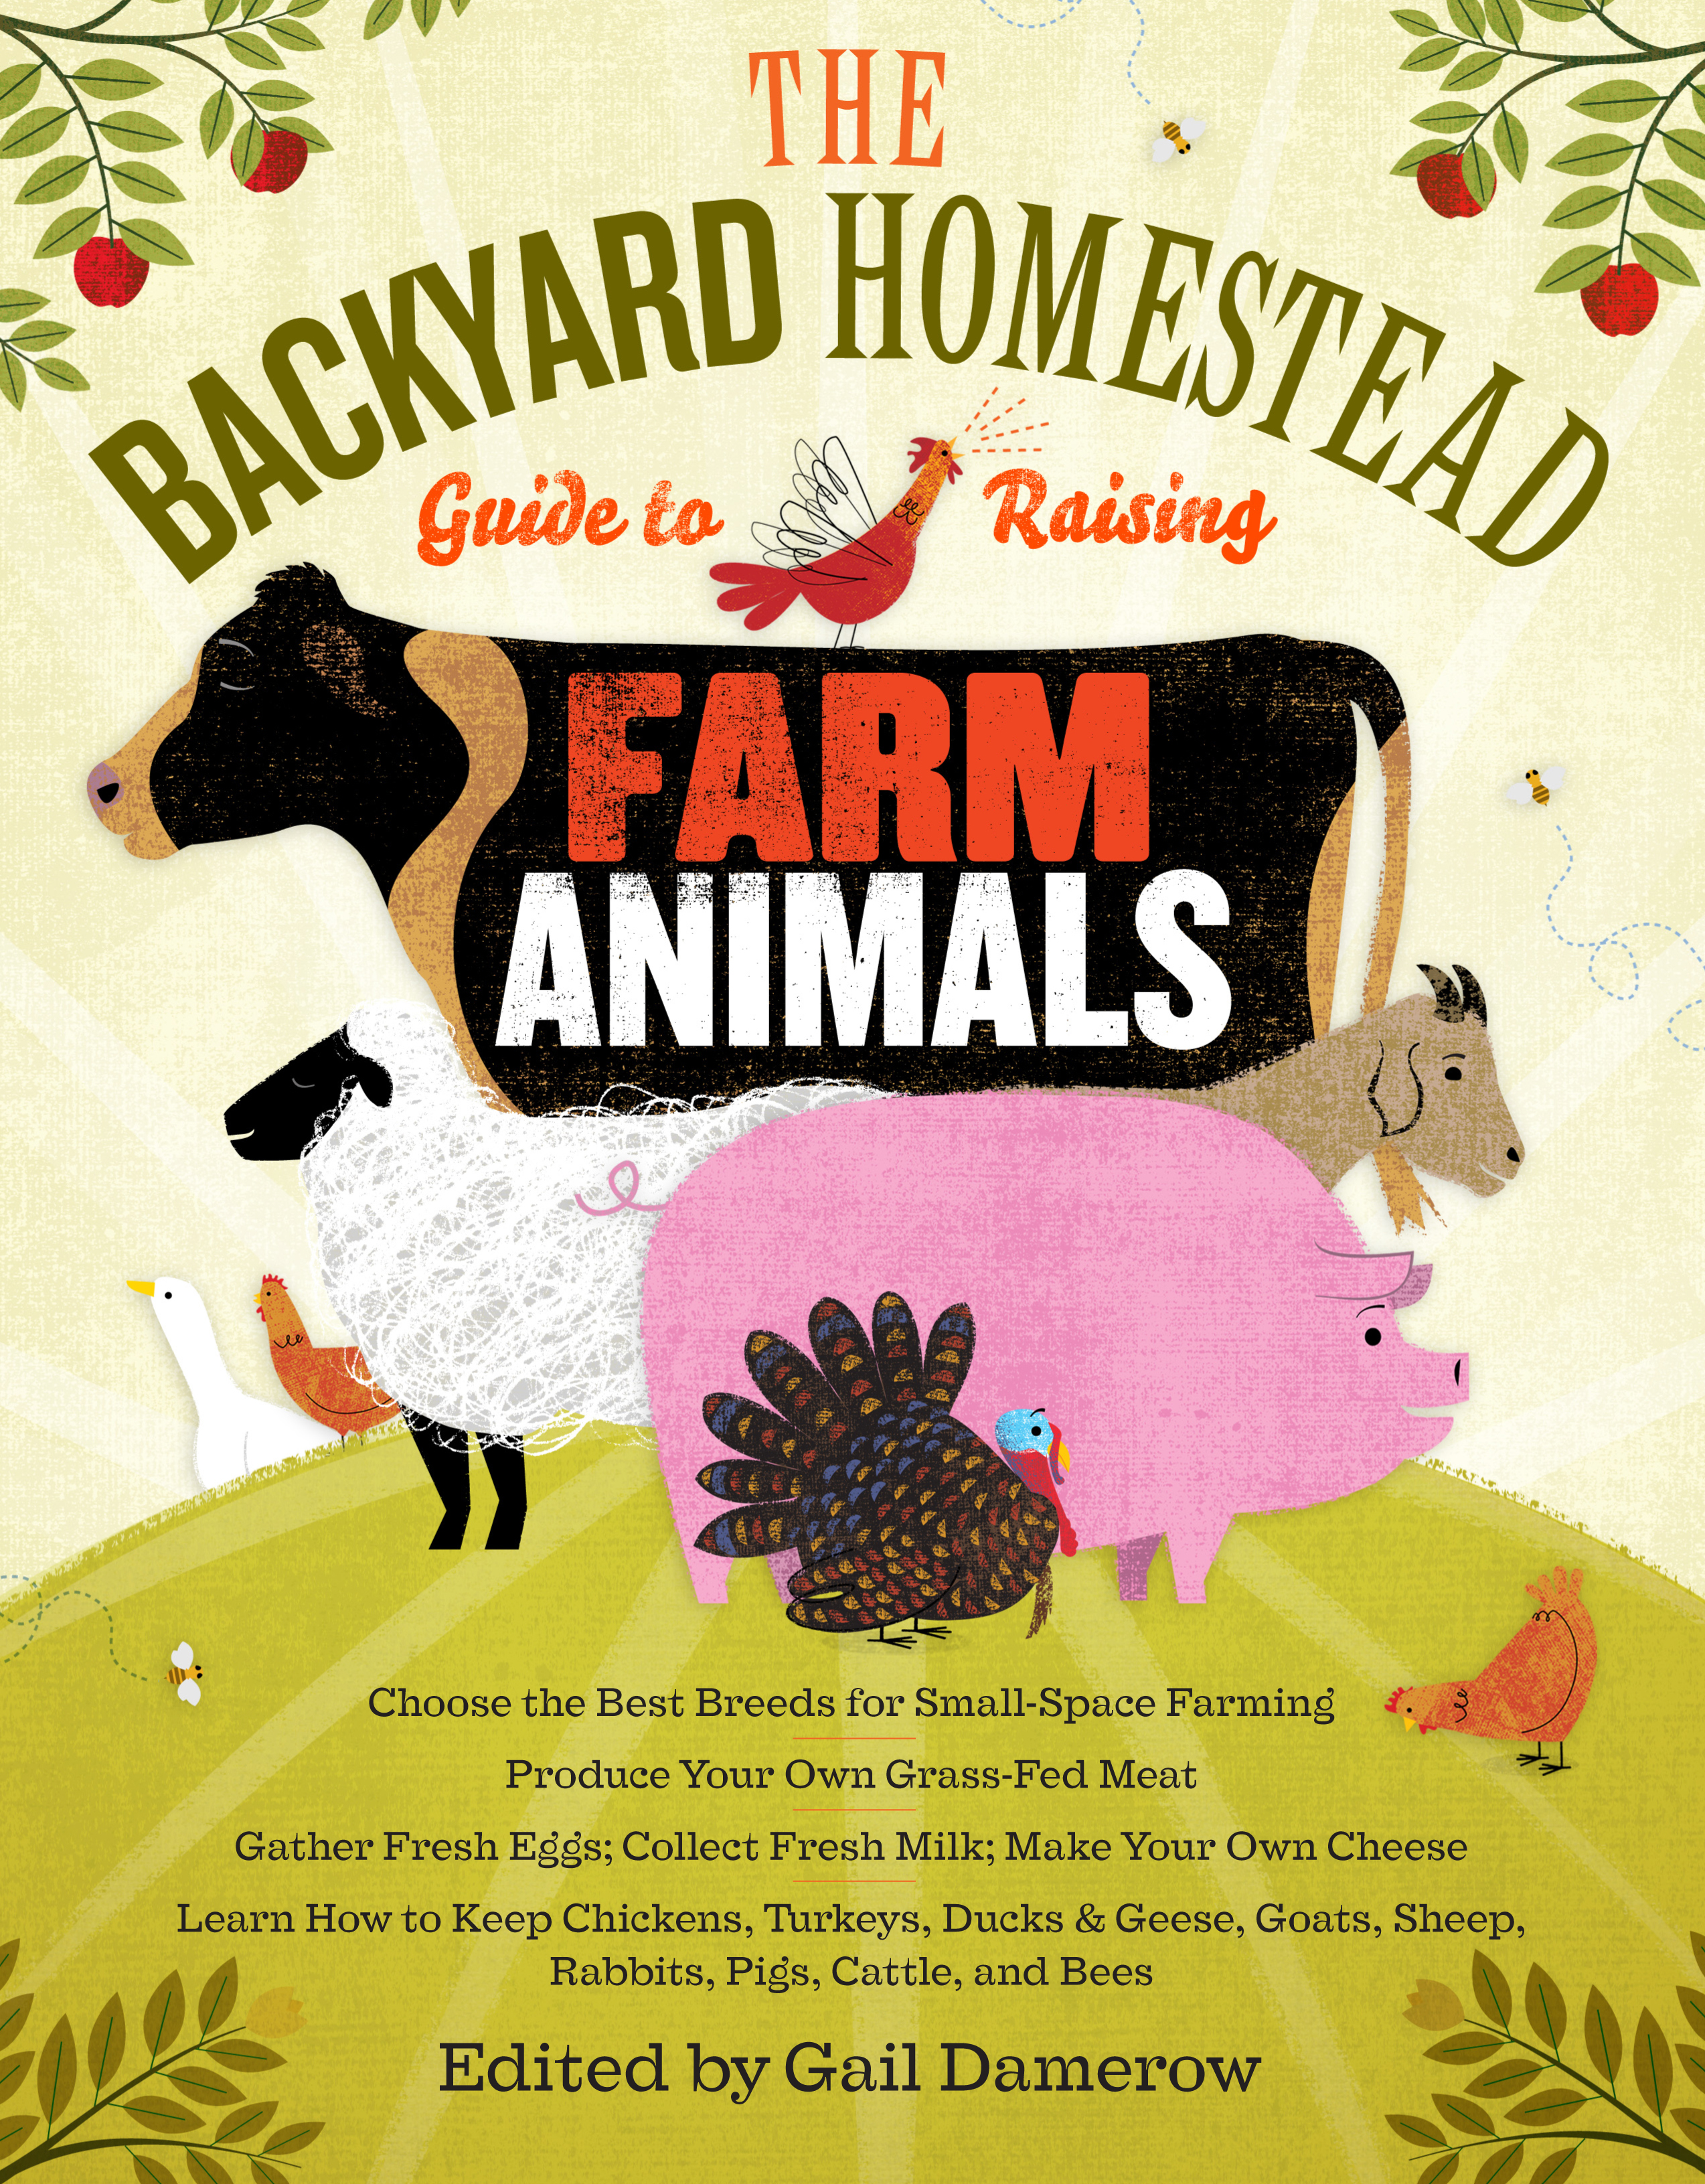 The Backyard Homestead Guide to Raising Farm Animals by Gail Damerow |  Hachette Book Group